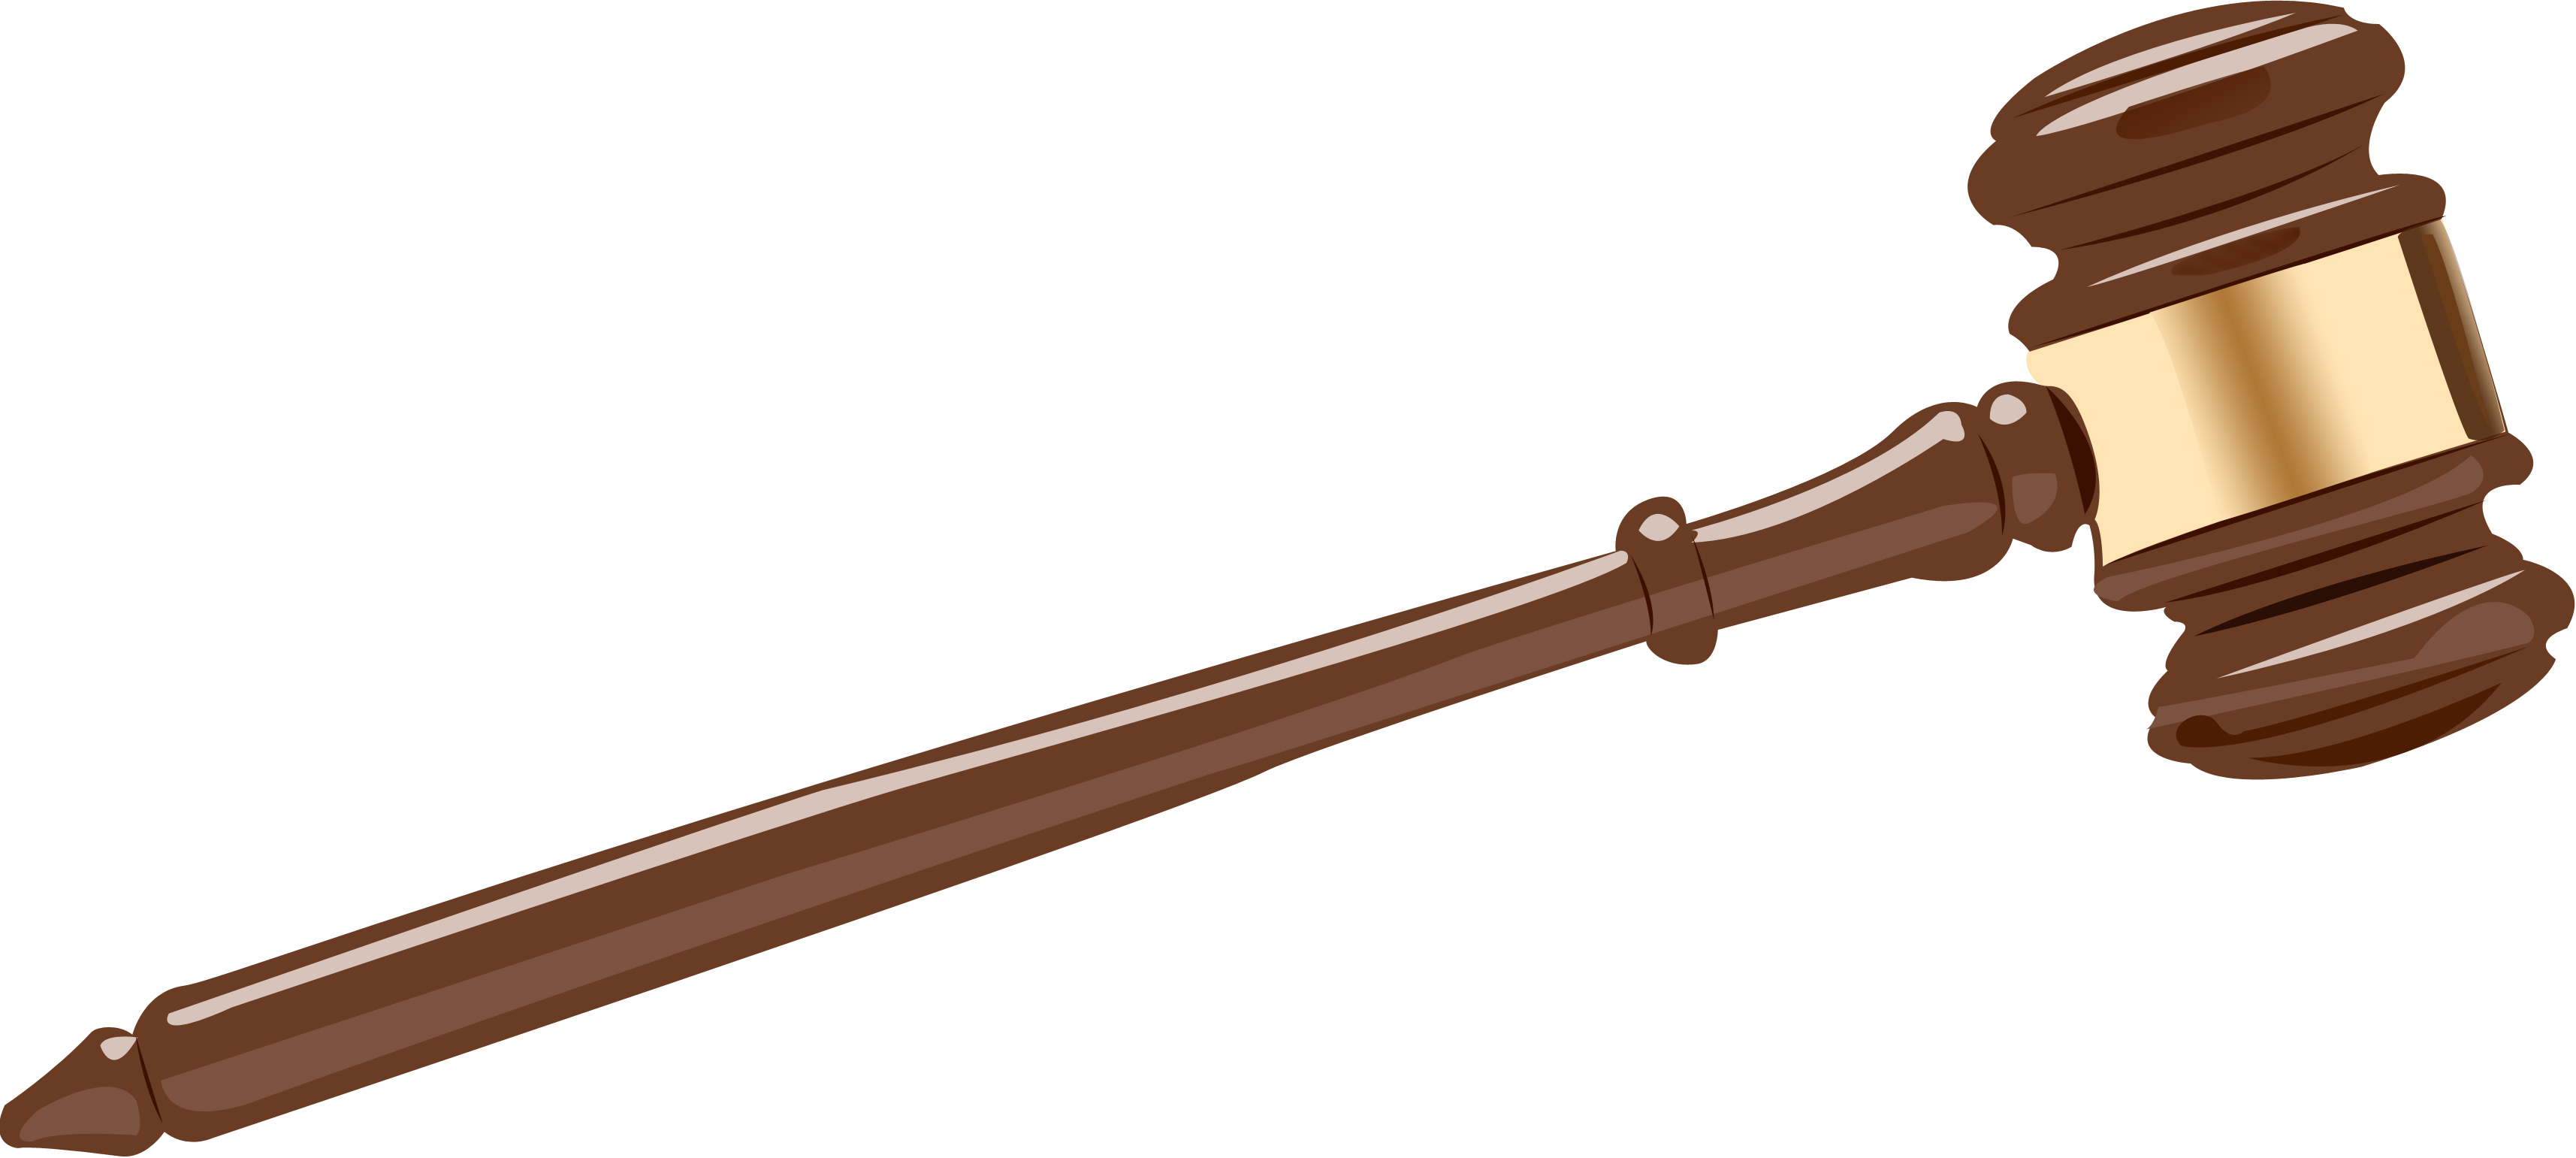 Clipart gavel vector magz free download vector graphics image